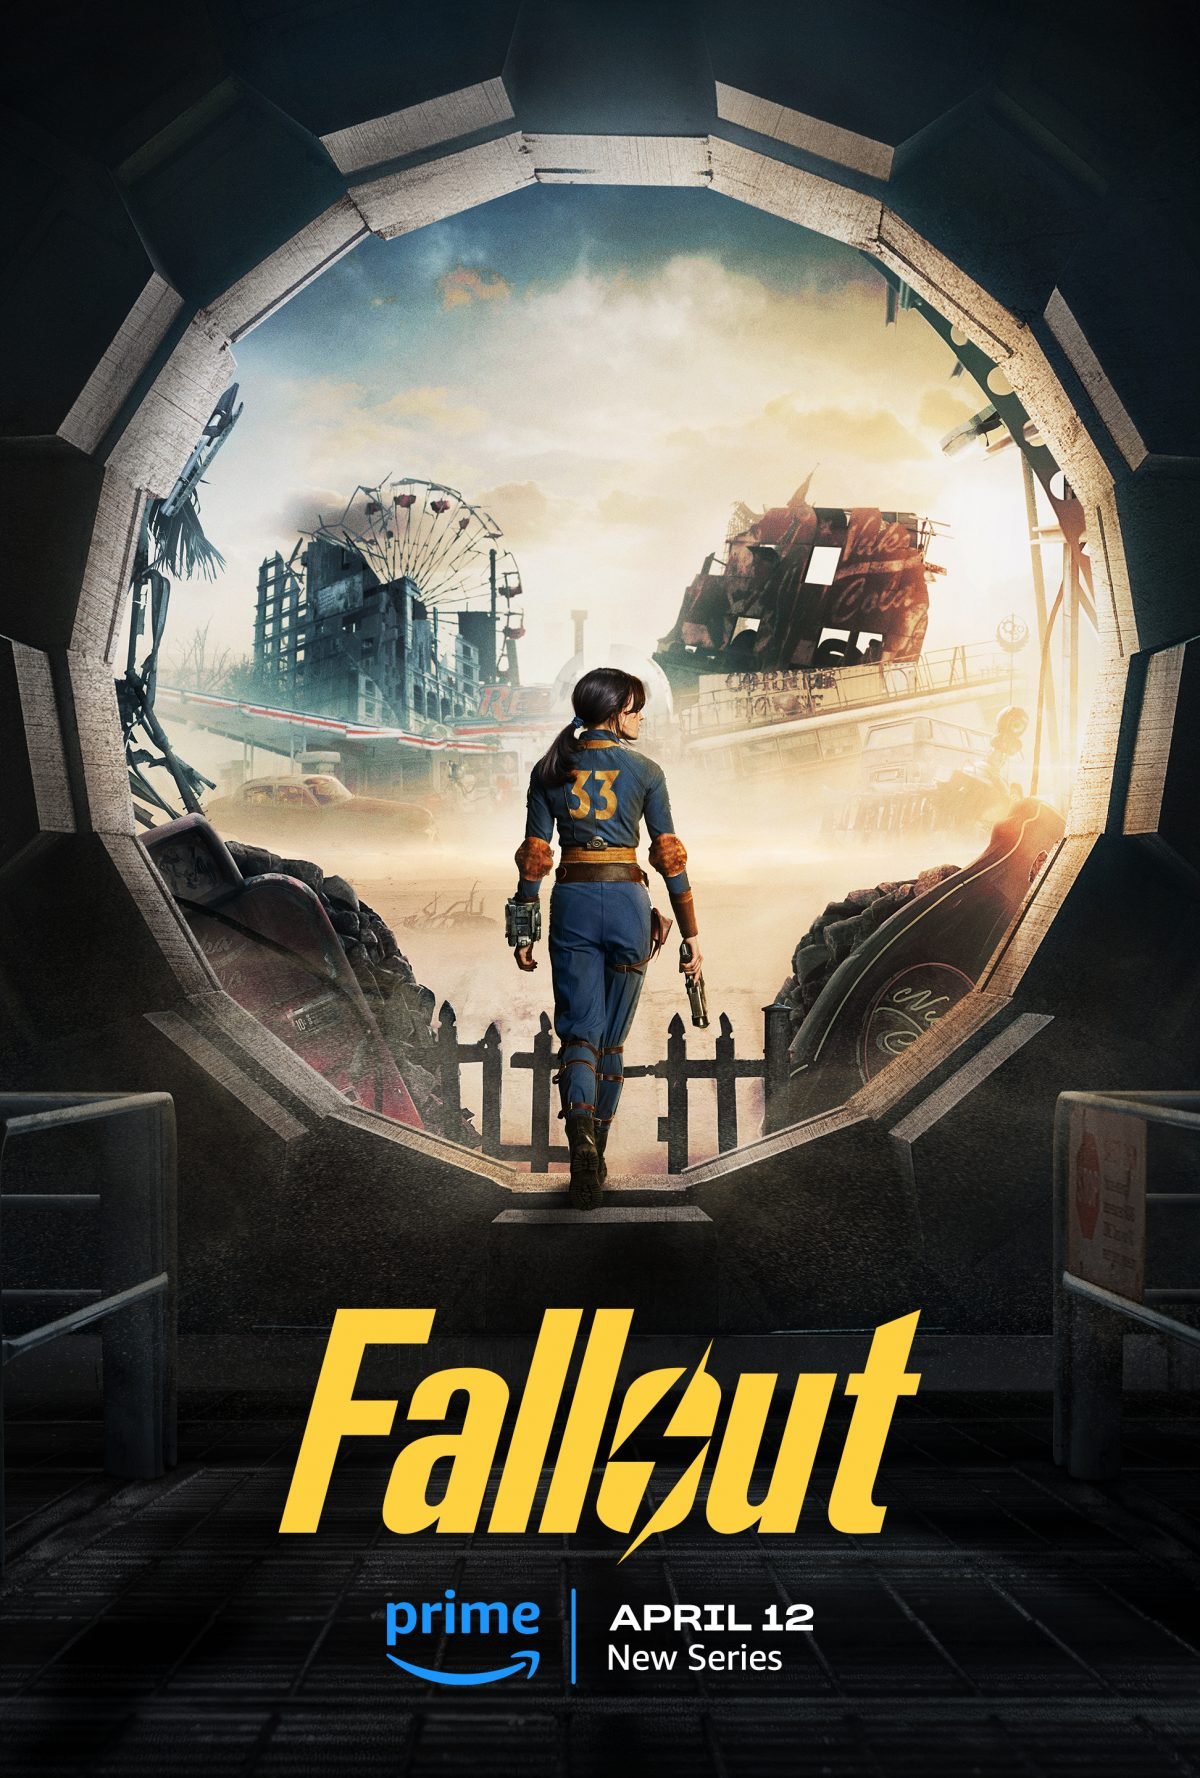 Lucy, a Vault Dweller in a blue jumpsuit with the number 33 on the back, stands in a door way looking at the Wasteland